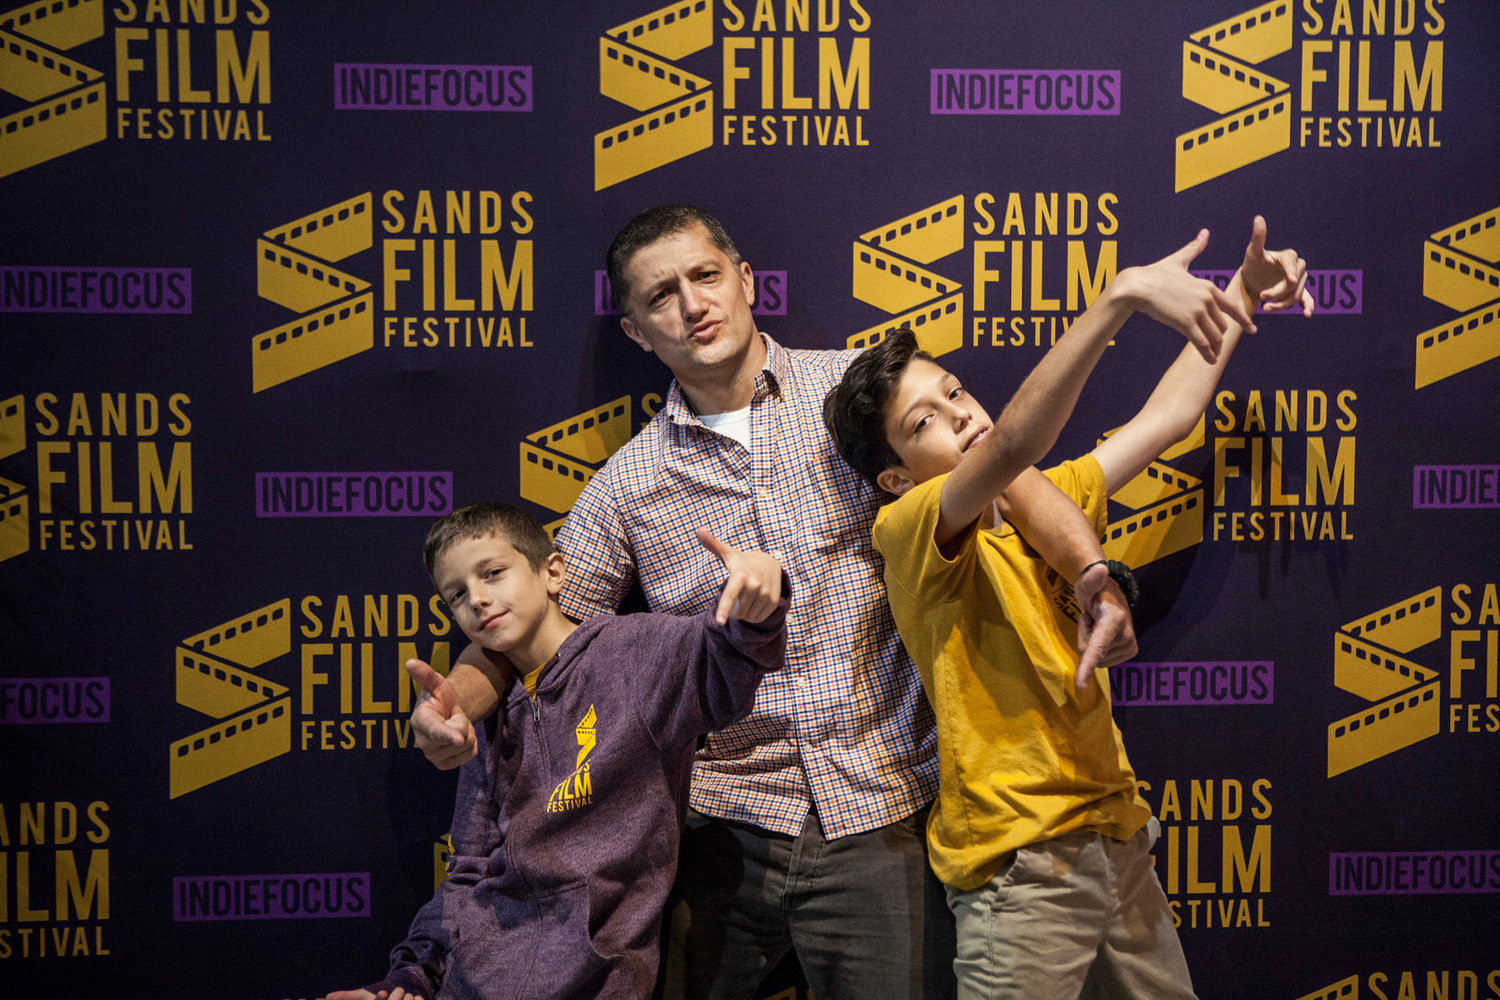 Director of the Sands Film Festival, Alen Mutic has some fun with his family during the movie breaks.